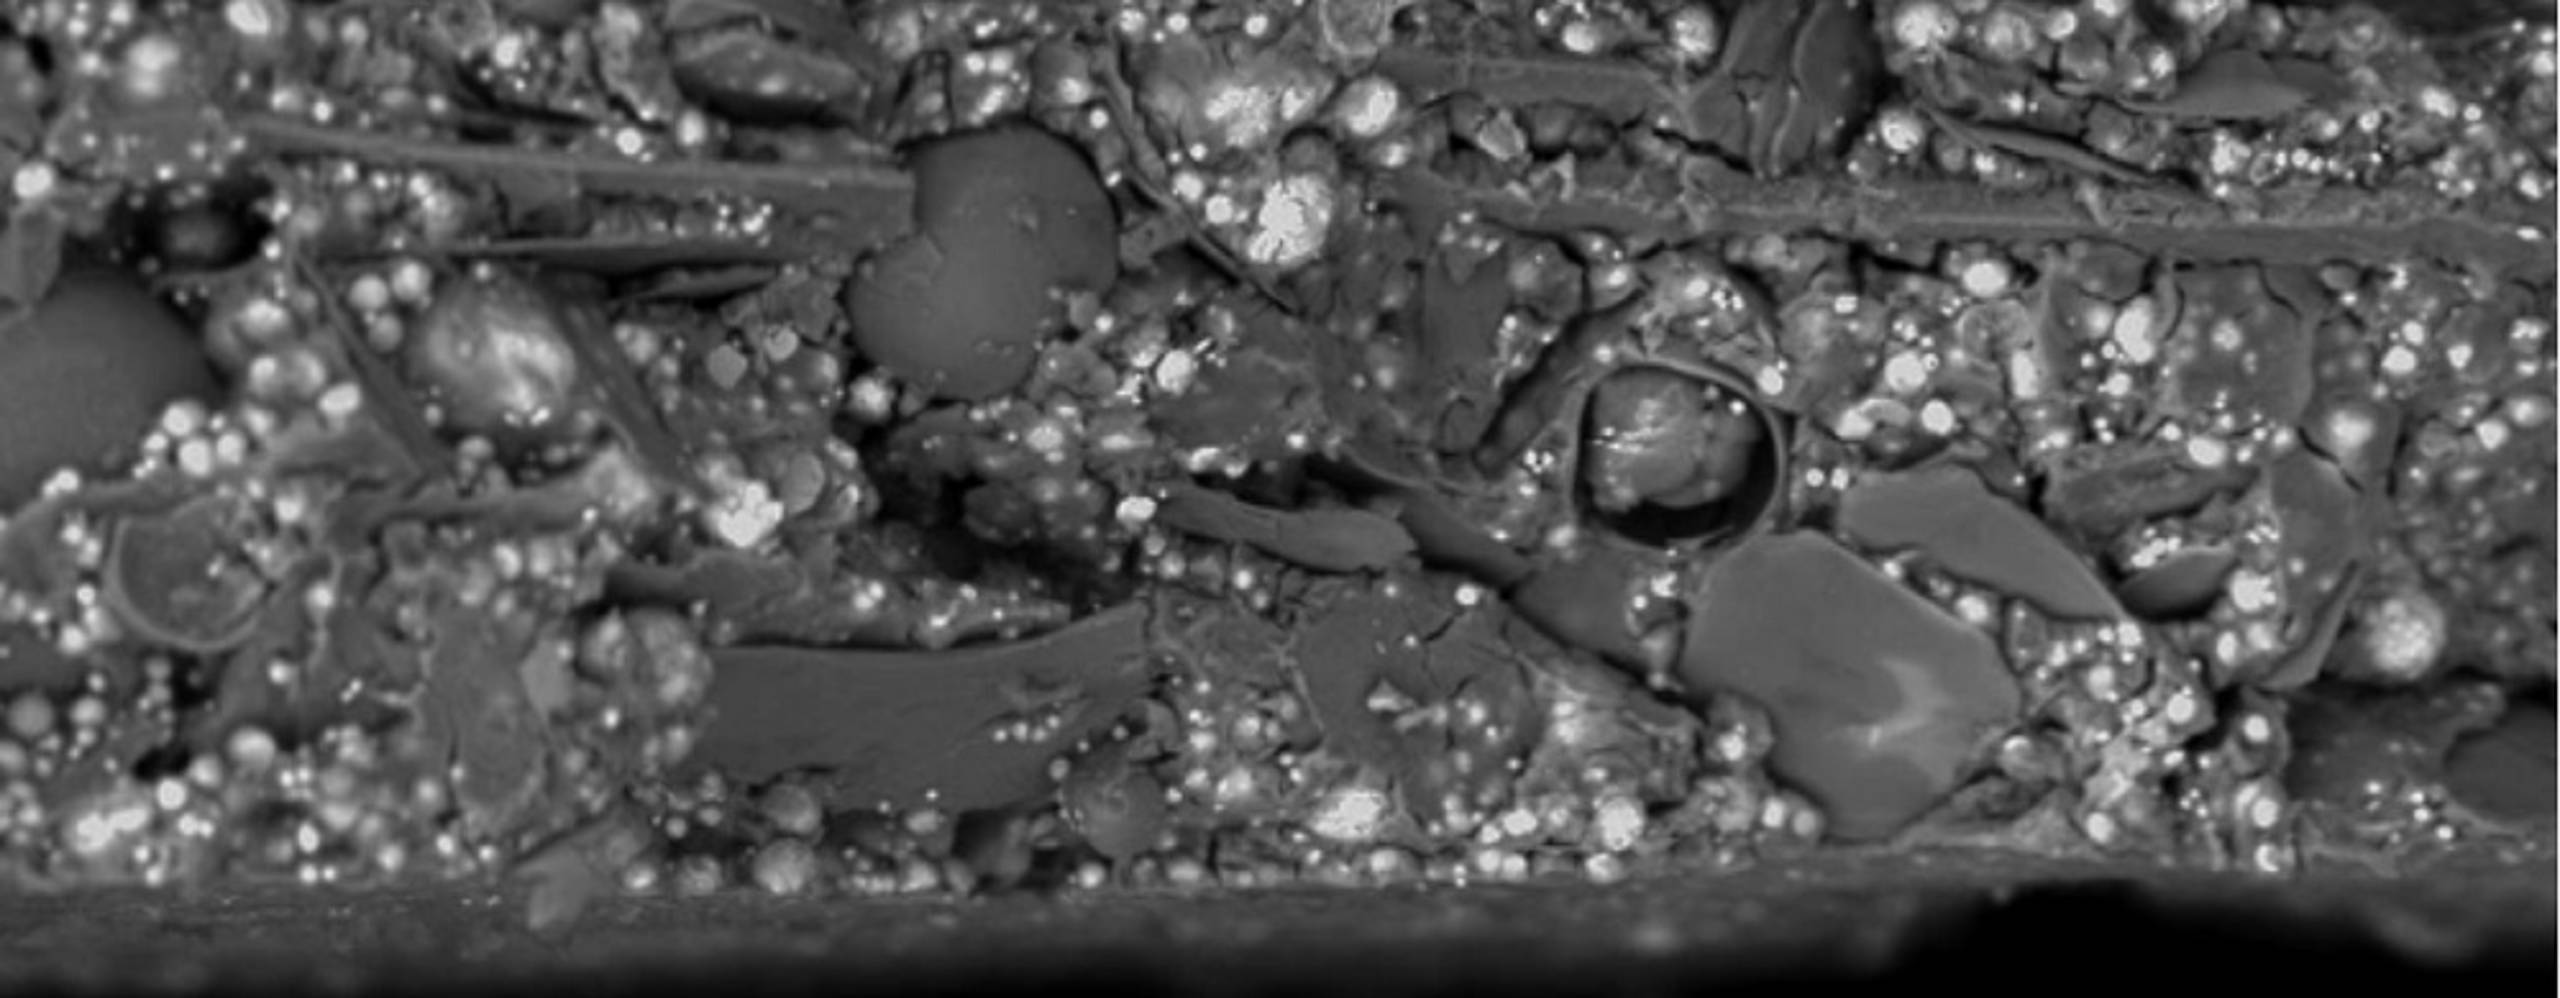 SEM image of an IOZ coating where glass flakes and ceramic spheres have been added to the coating.